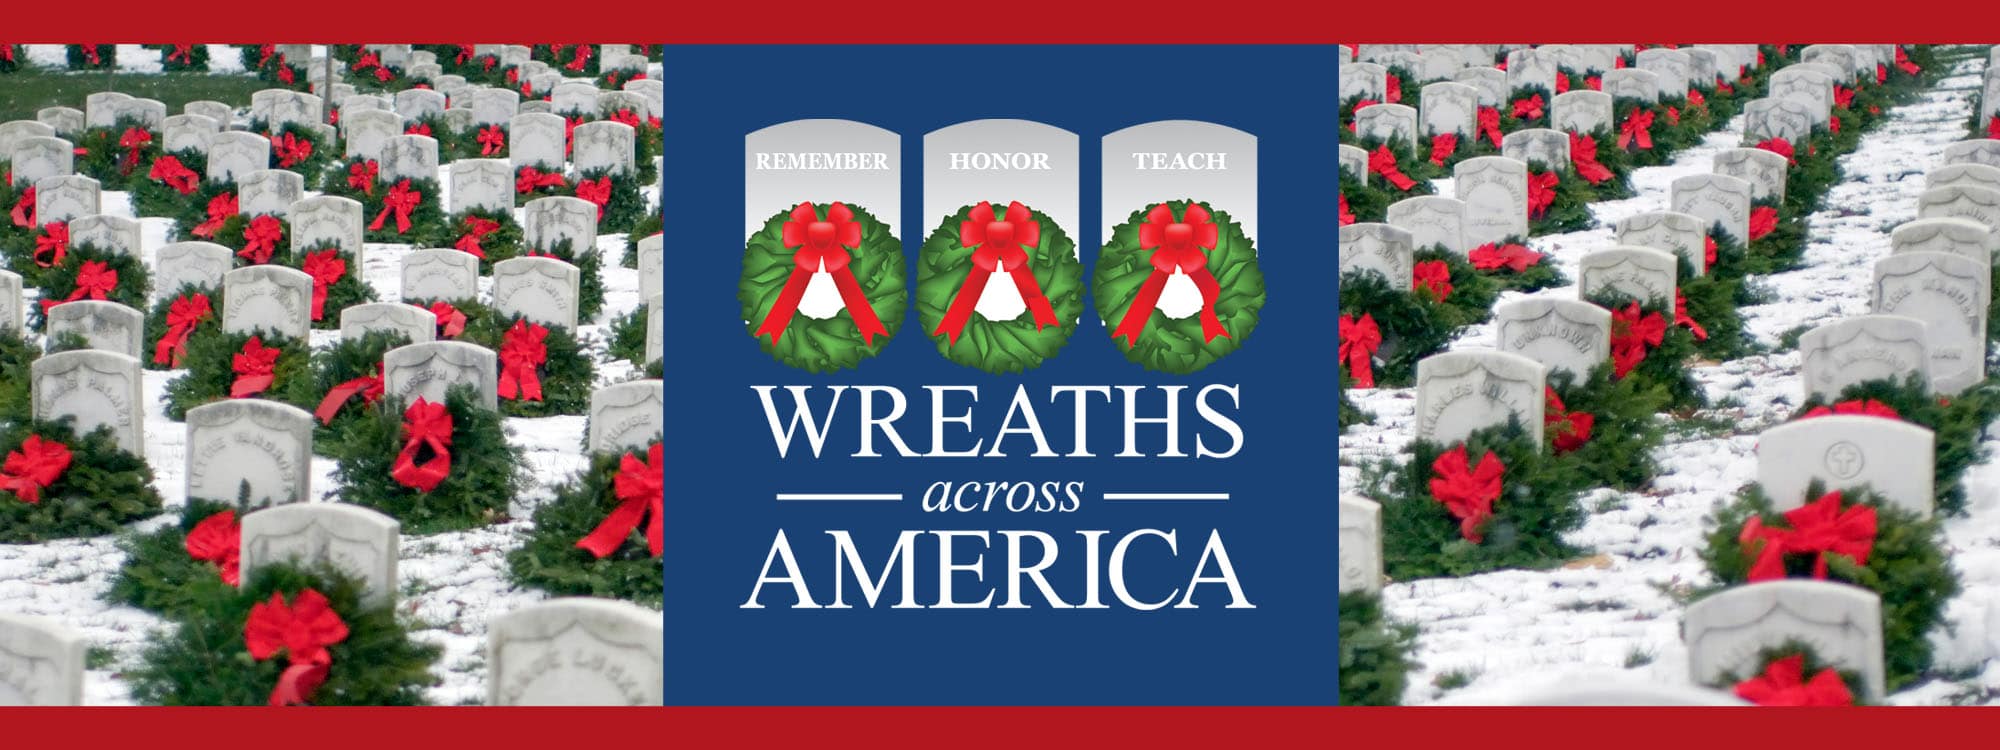 The Bath National Cemetery is set for Wreaths Across America Day | WETM -  MyTwinTiers.com